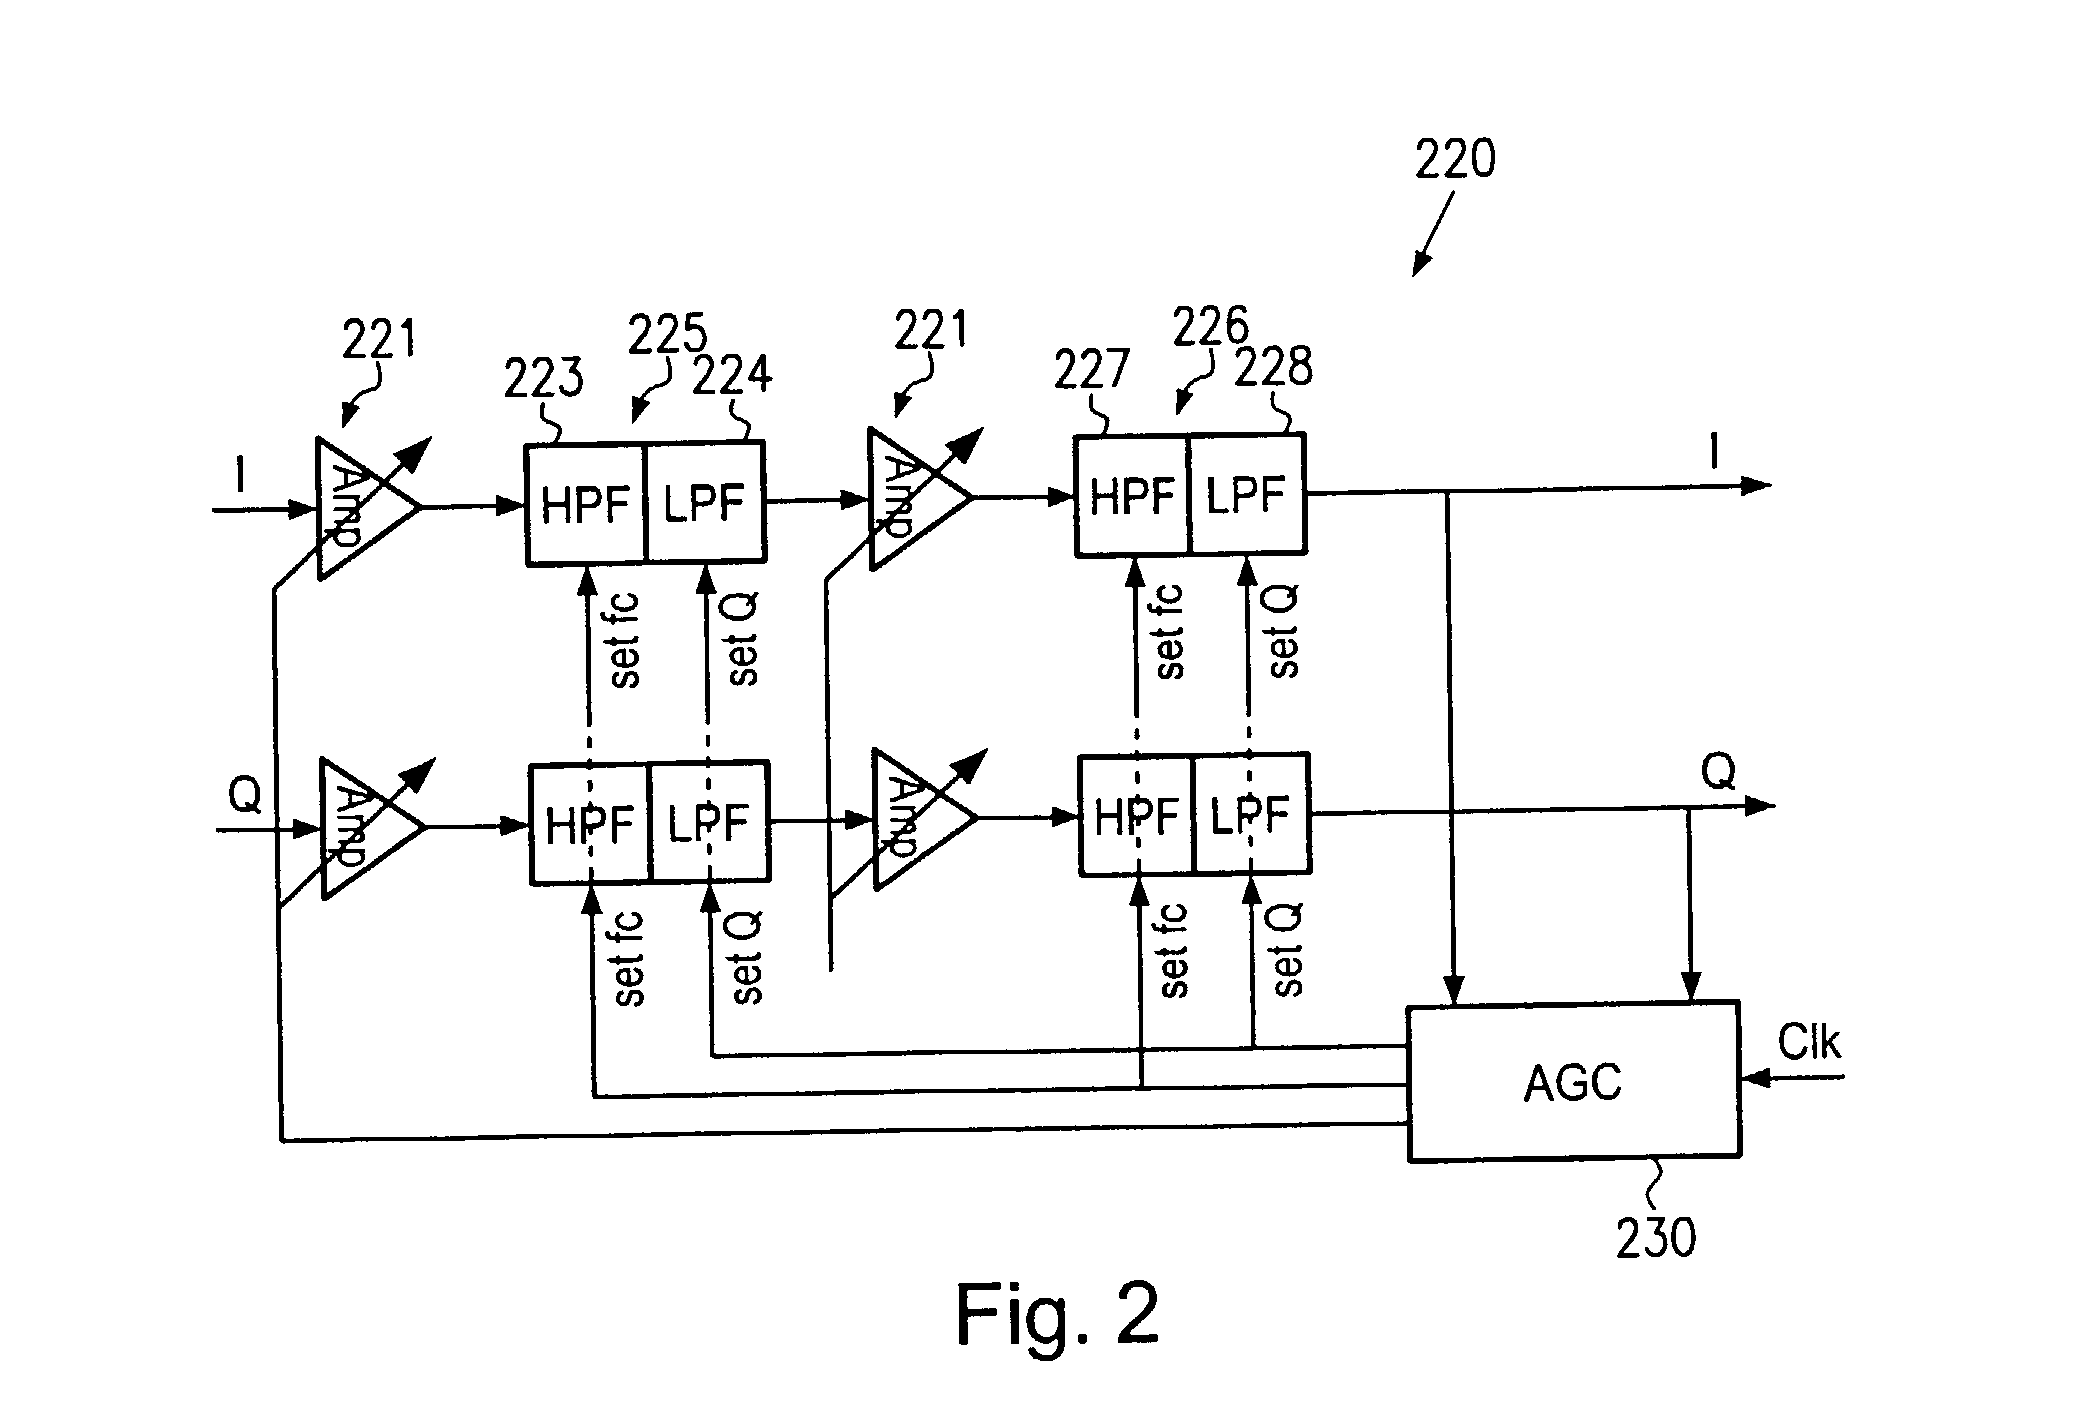 Digital automatic gain controlling in direct-conversion receivers